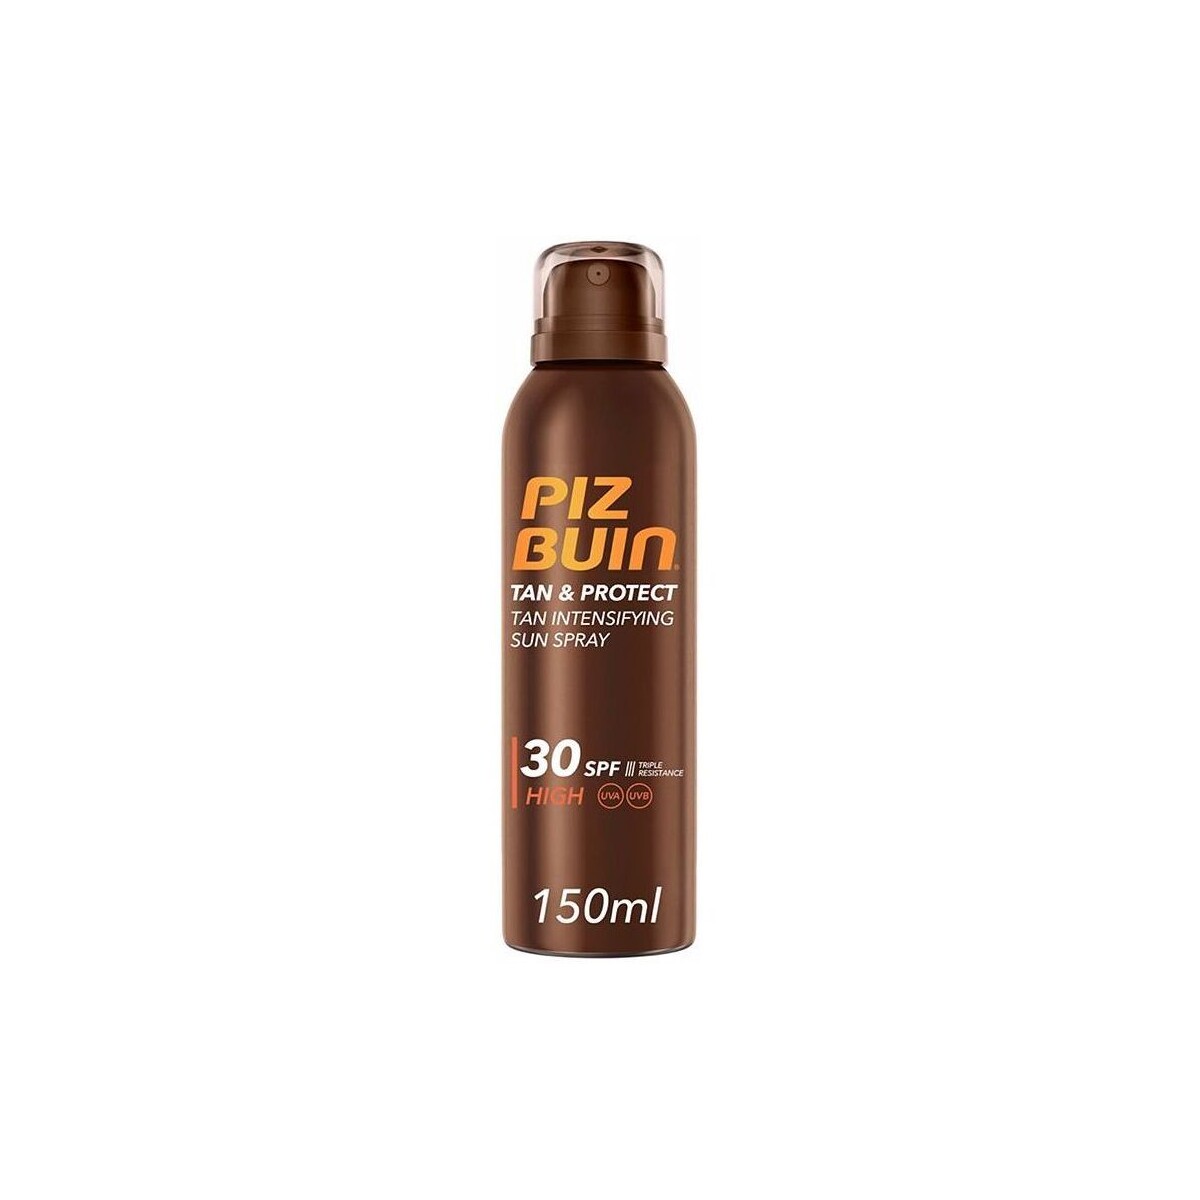 Beauté Protections solaires Piz Buin Tan & Protect Intensifying Spray Spf30 